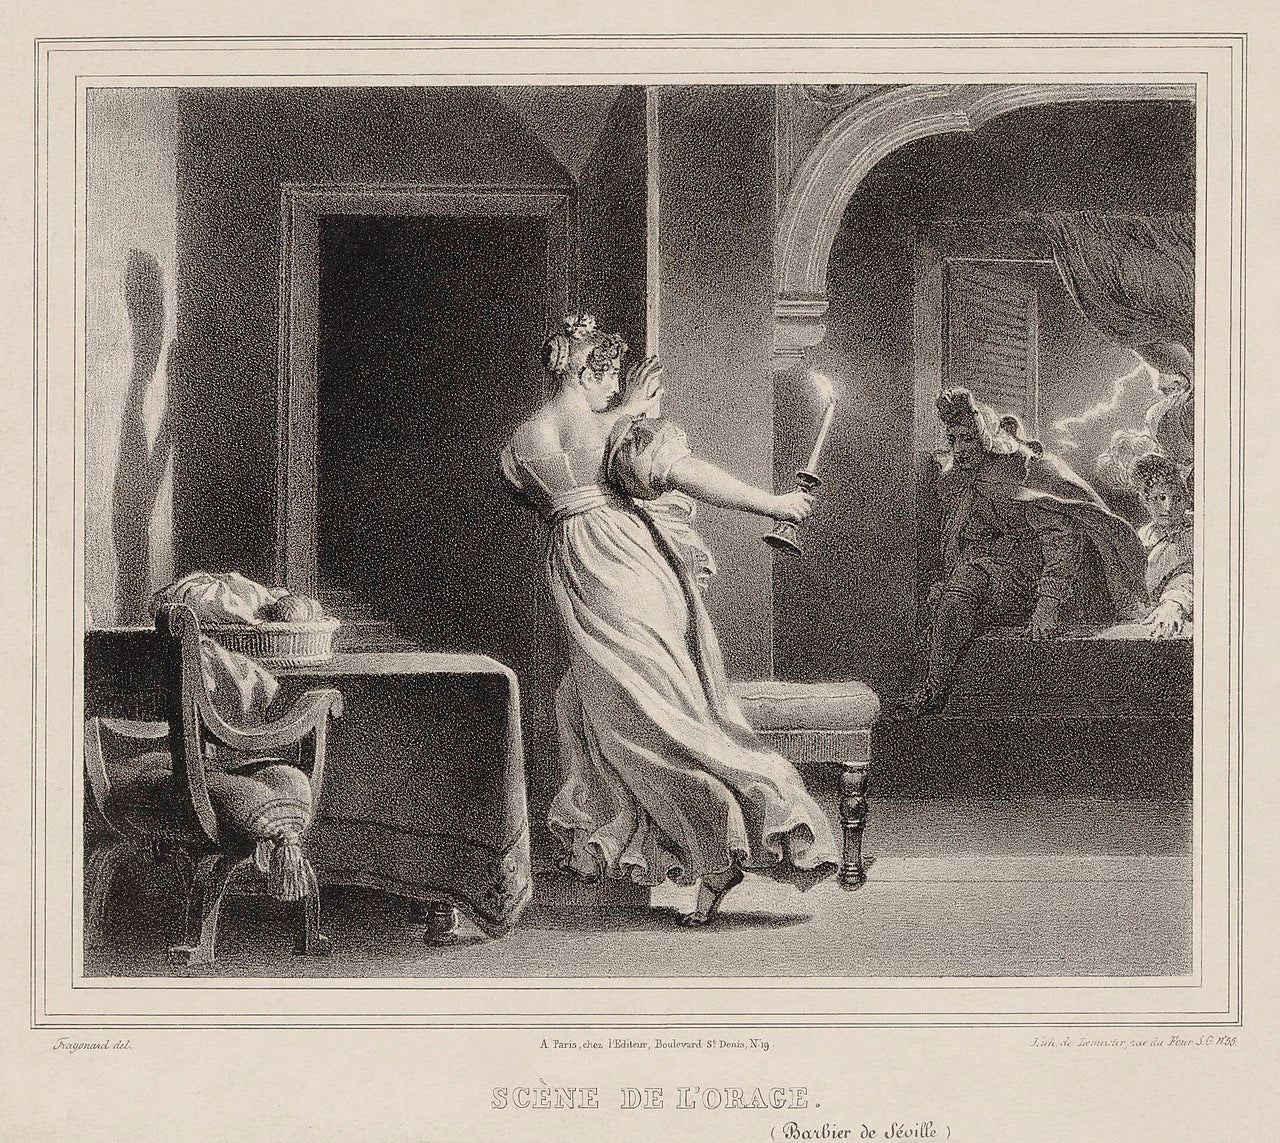 The opera Barber of Siville by Rossini 